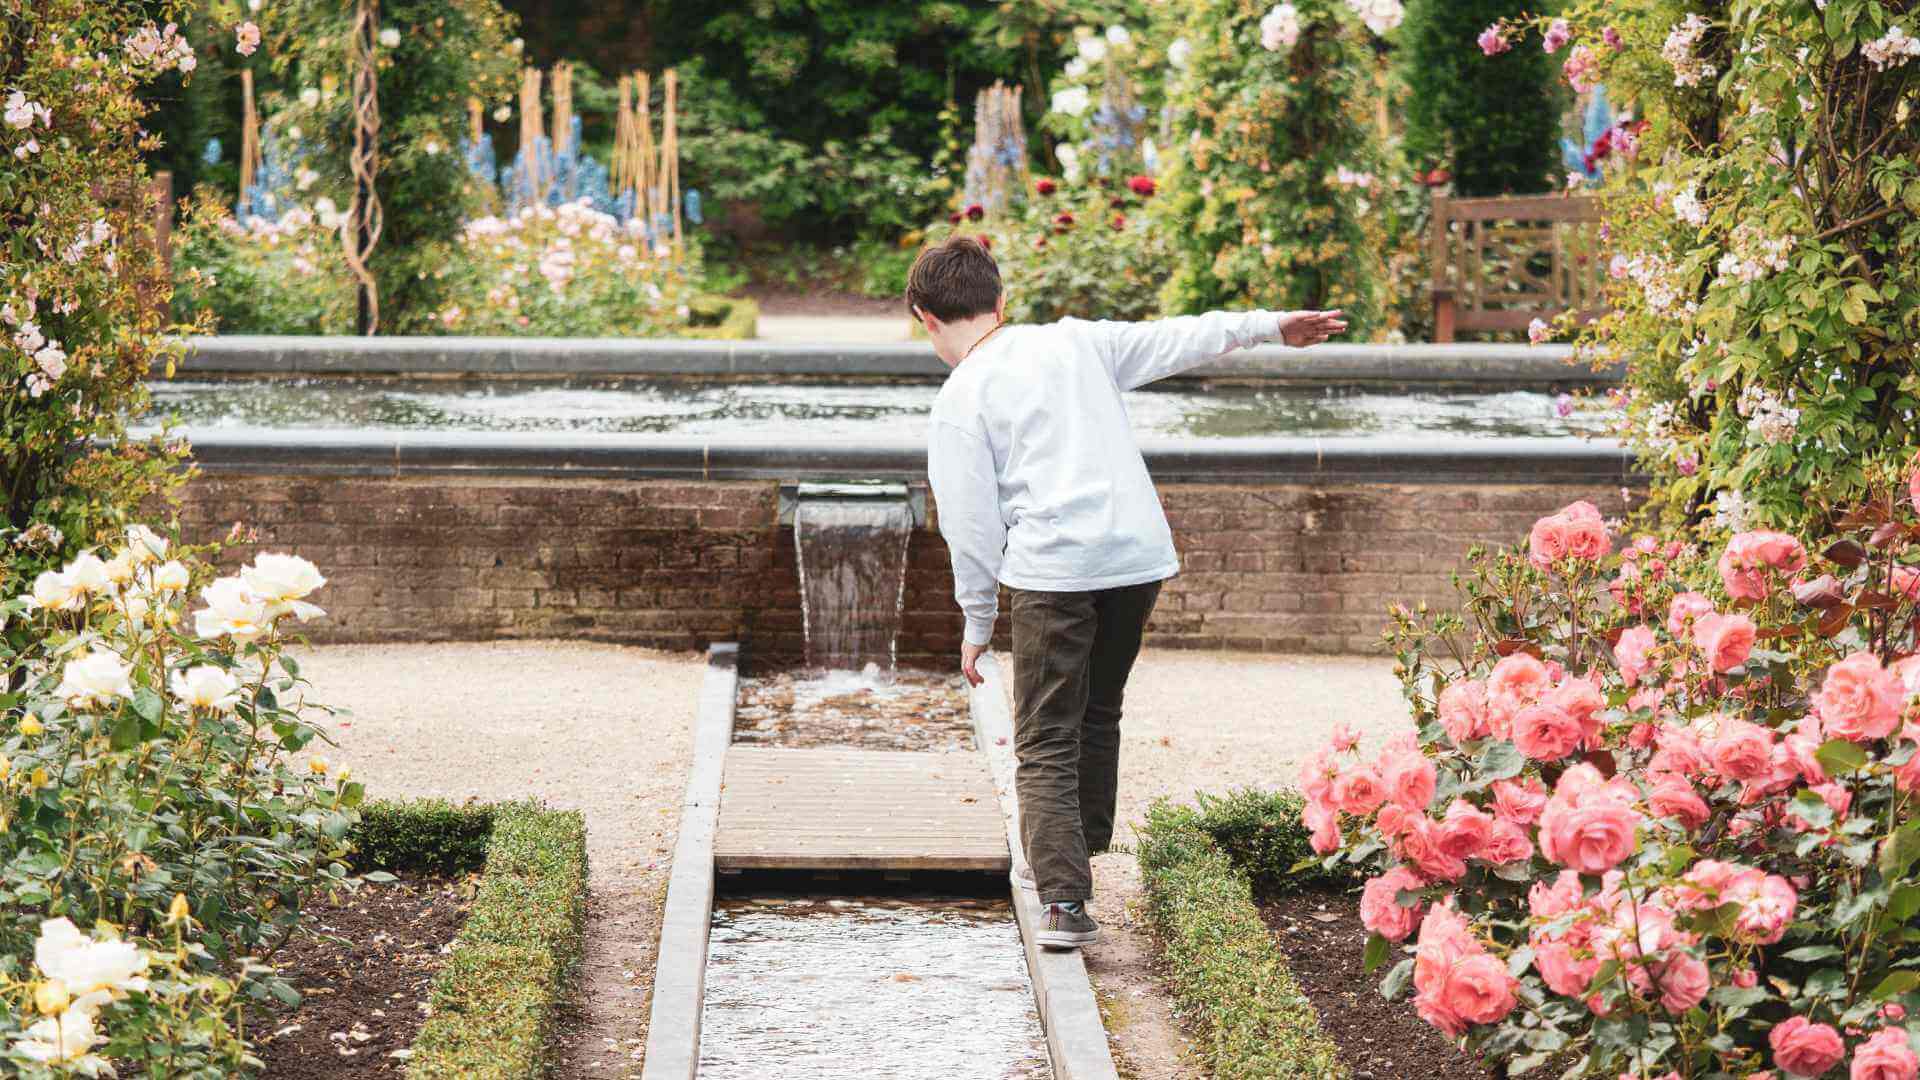 Kid playing in the Ornamental garden